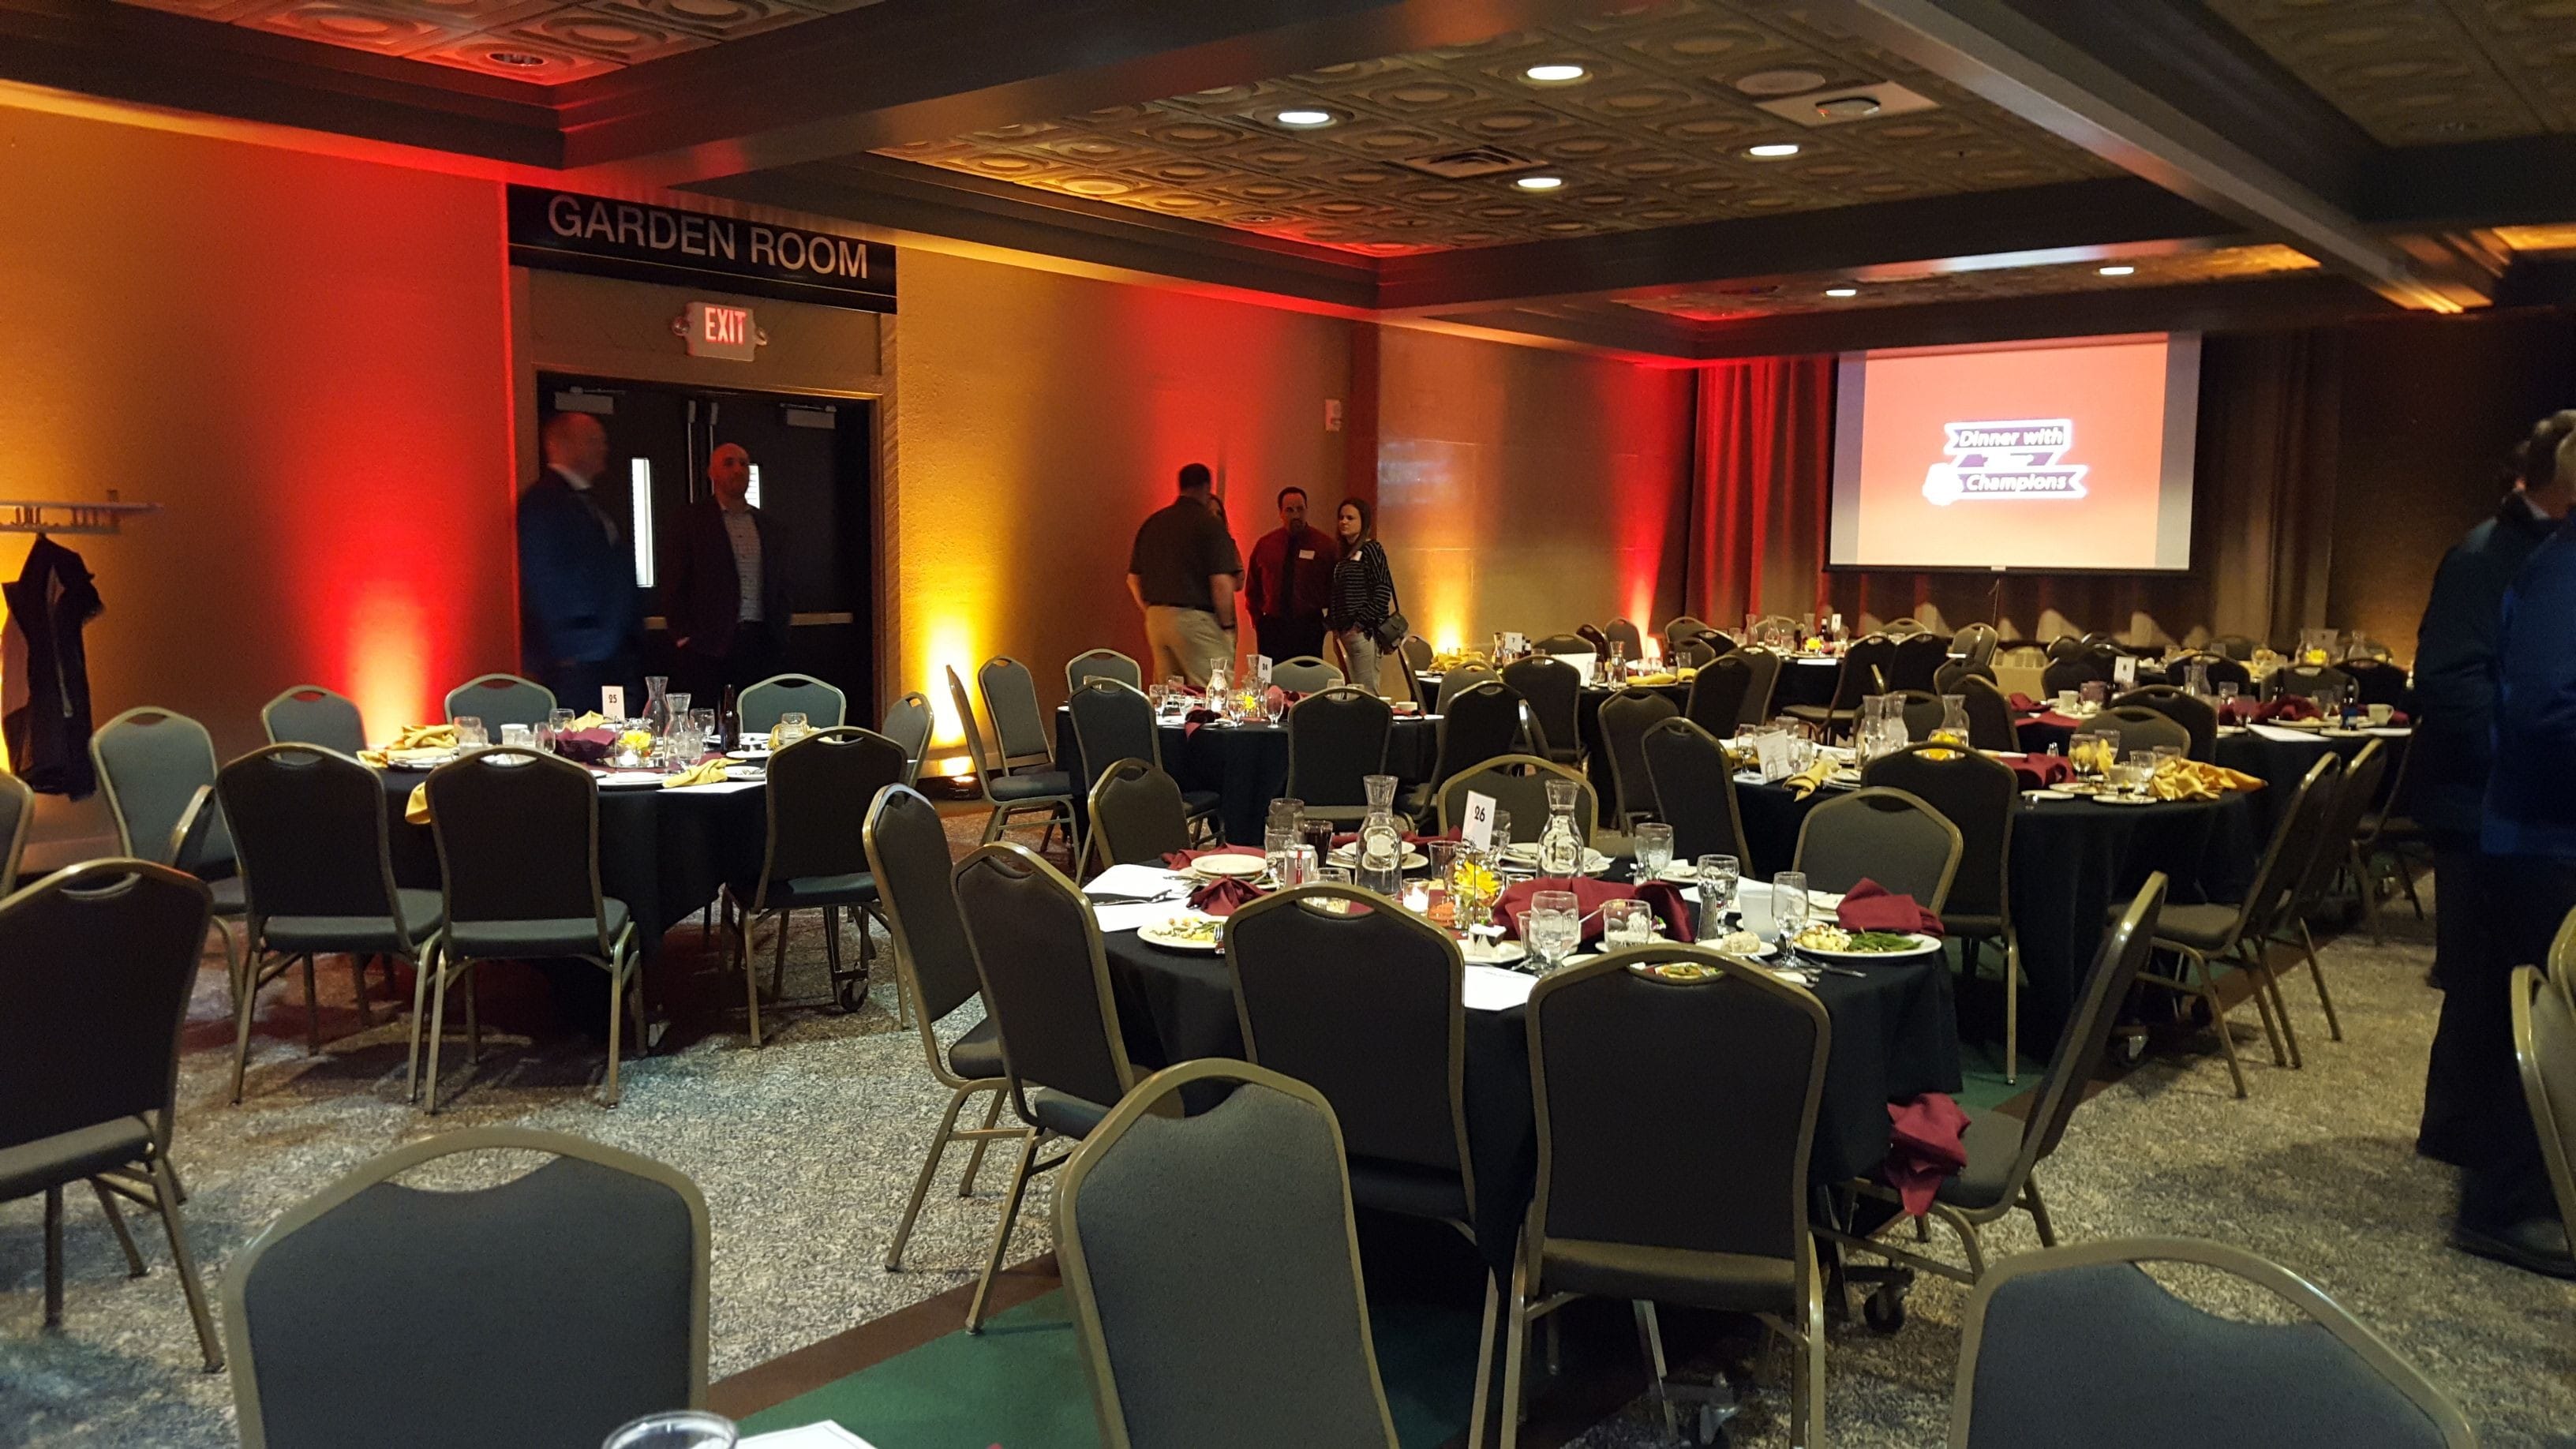 UMD event. Up lighting in a dim red and a gold for school colors.